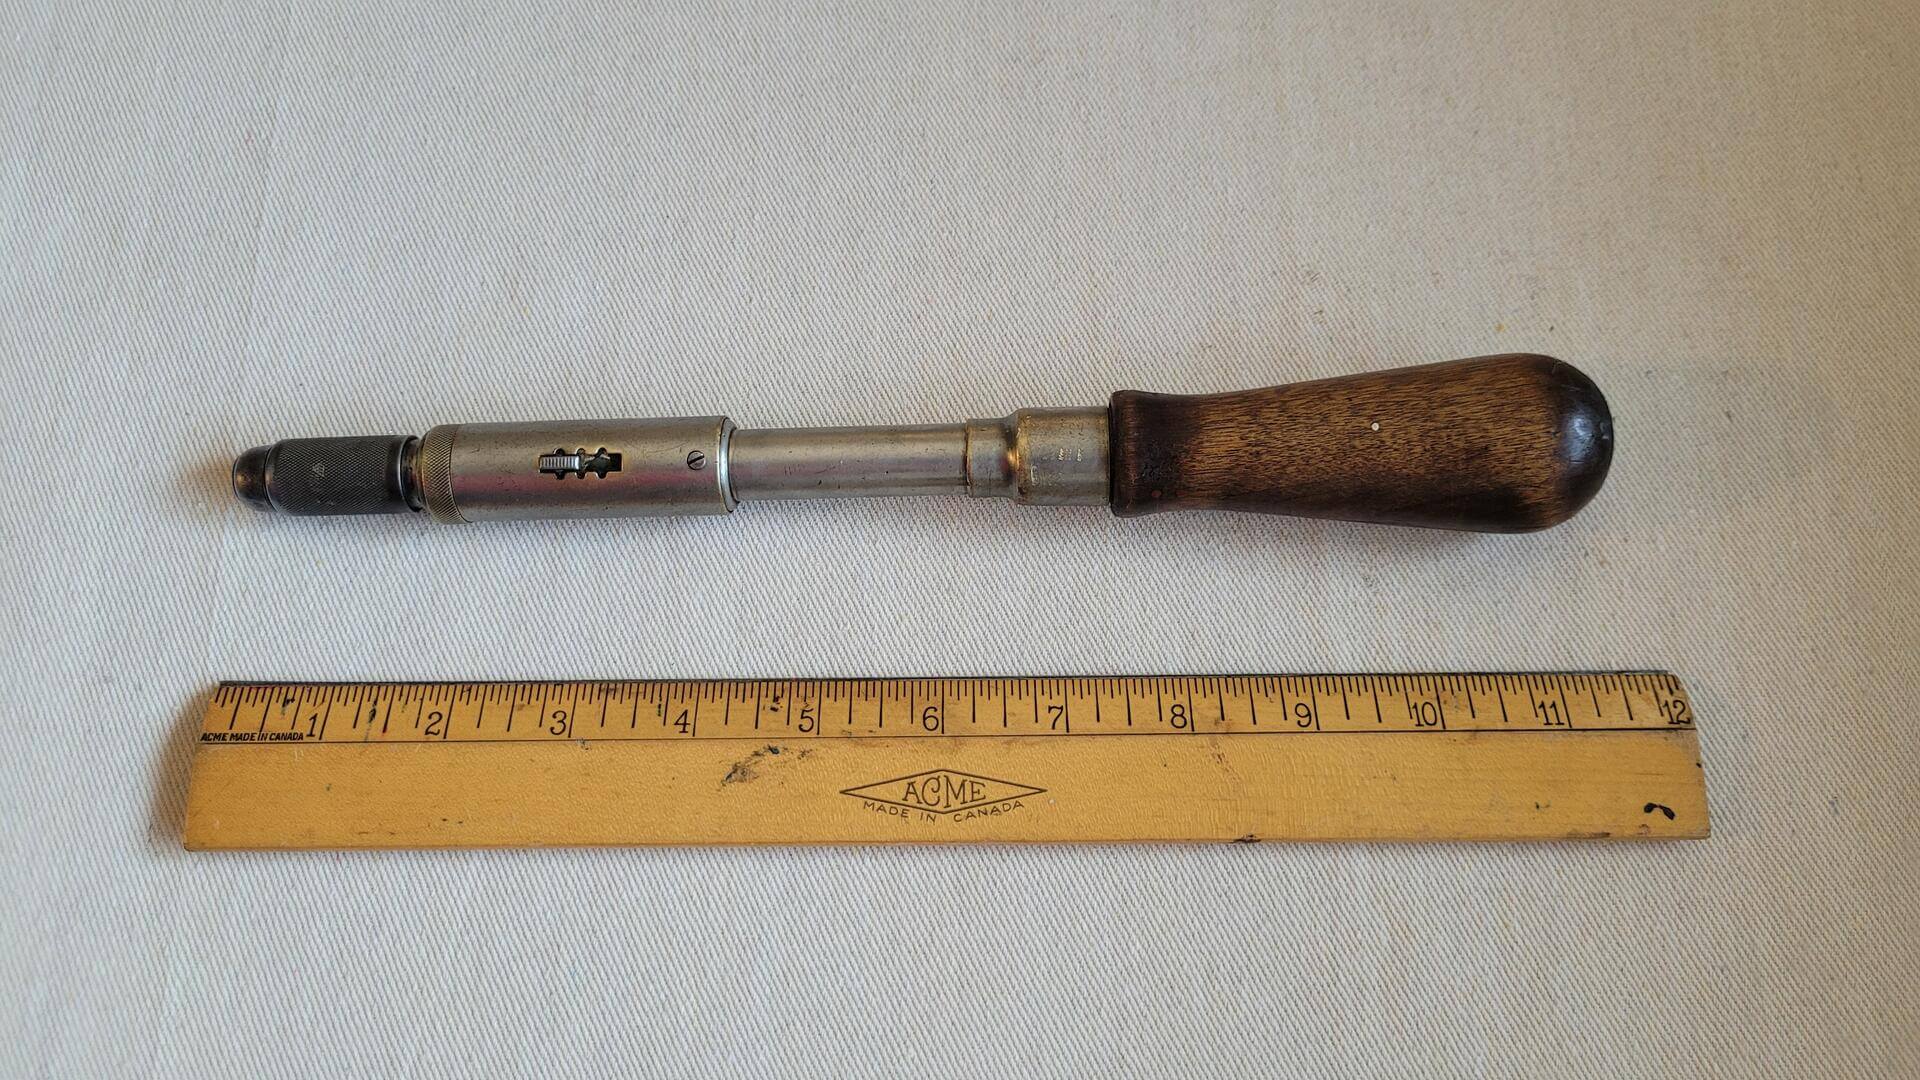 Vintage Yankee No 30 push drill screwdriver by North Brothers Manufacturing Company from Philadelphia PA